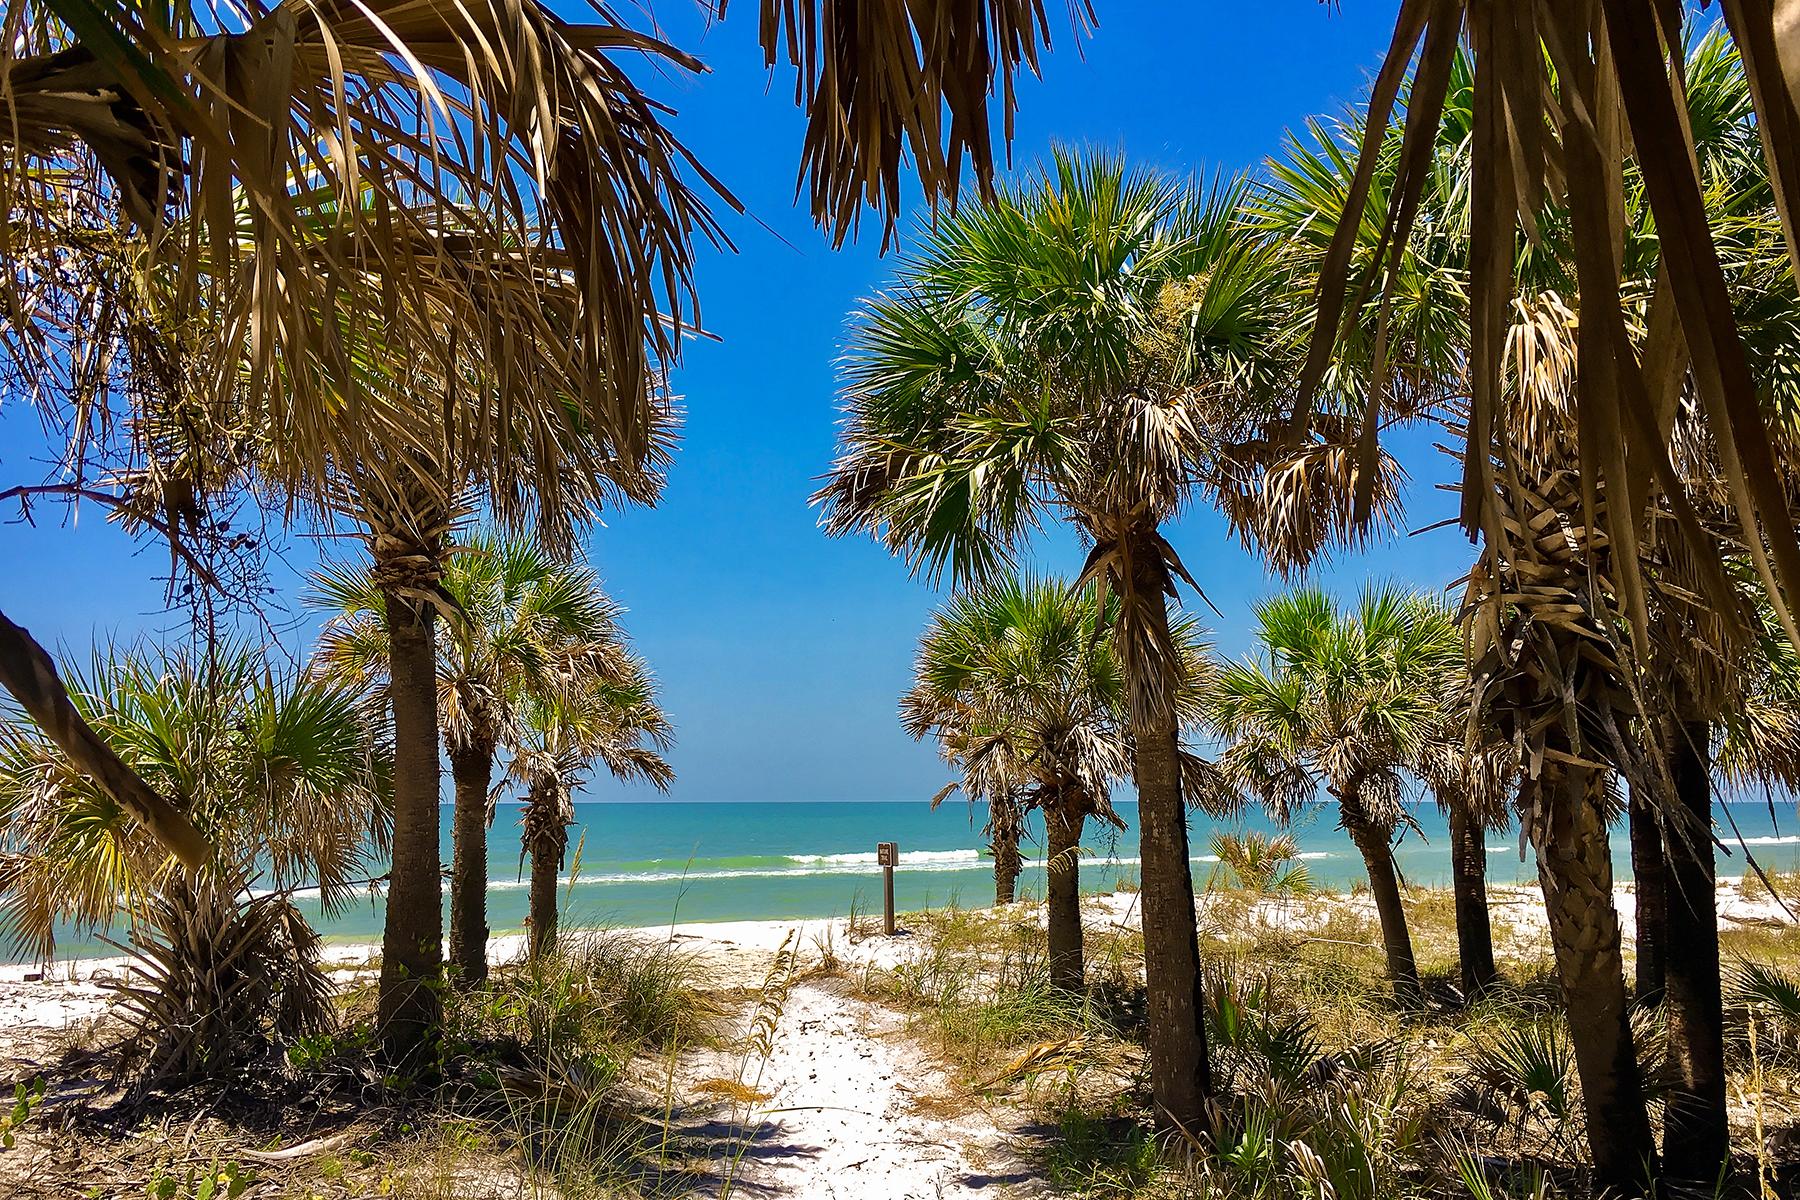 florida places to visit in june